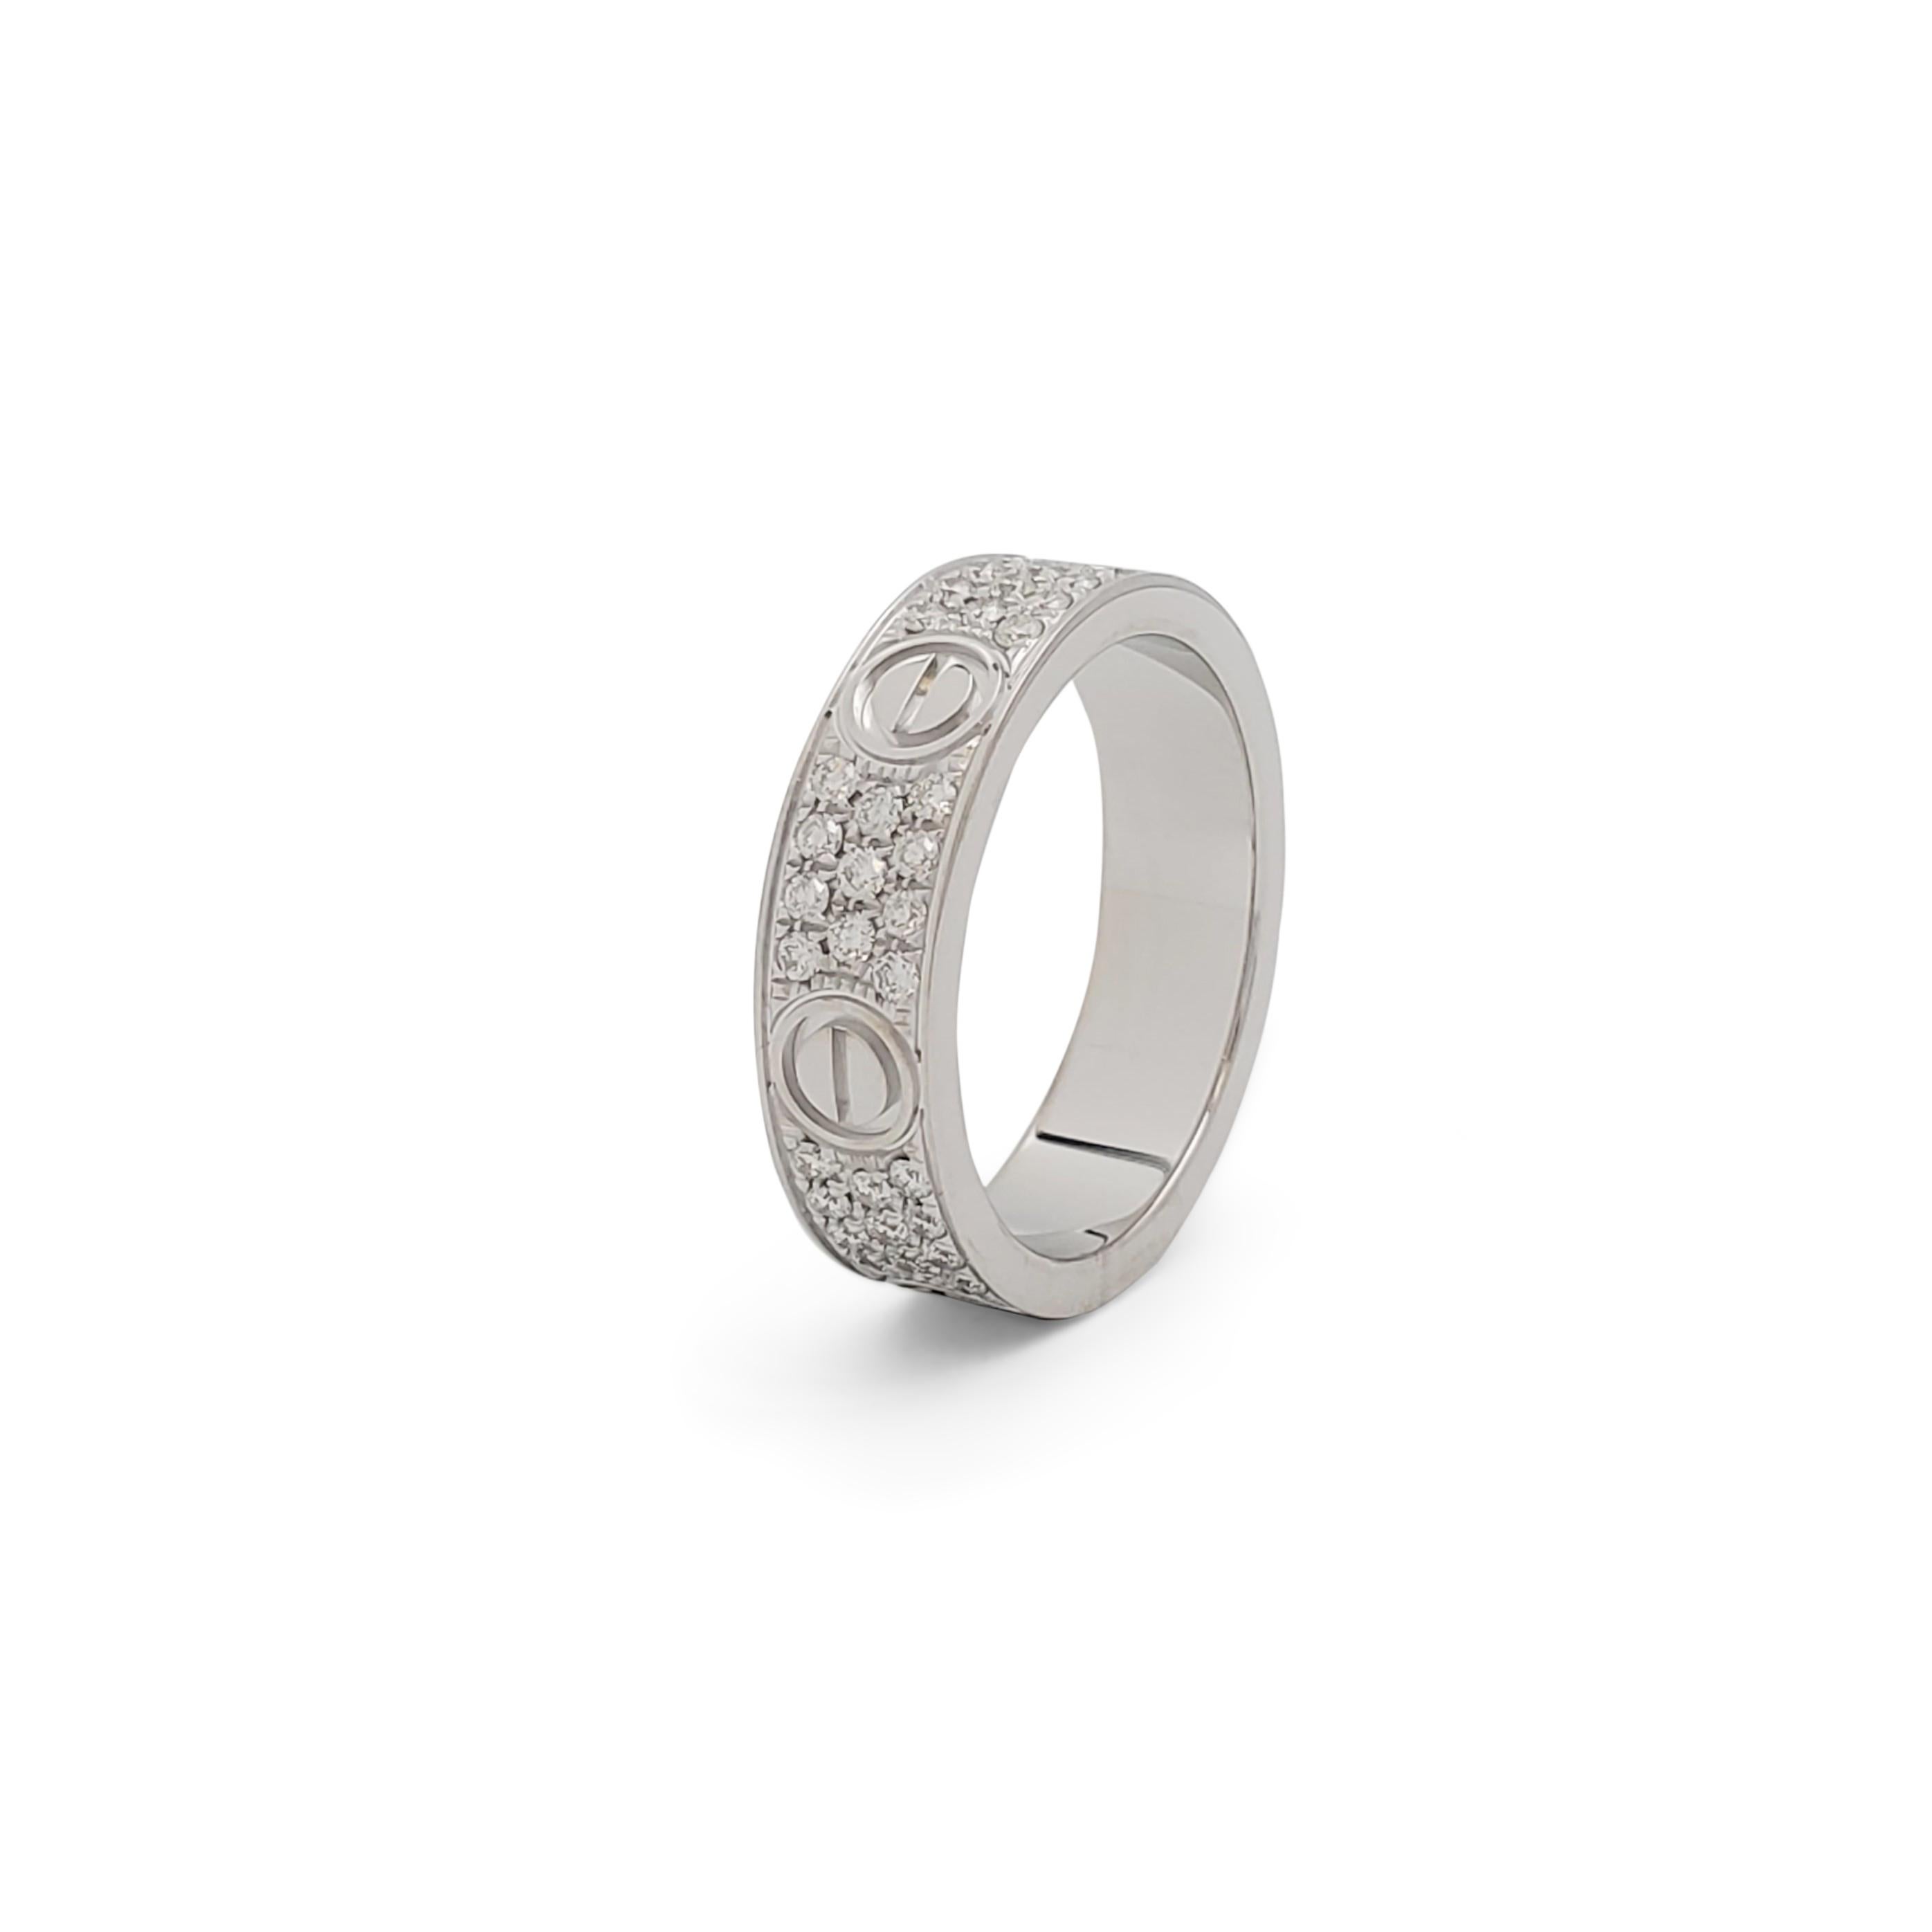 Authentic iconic Cartier 'Love' ring crafted in 18 karat white gold is pave set with an estimated 0.66 carats of high-quality round brilliant cut diamonds (E-F, VS). Signed Cartier, 59, Au750, with serial number and hallmark. Ring size 59 (US 8